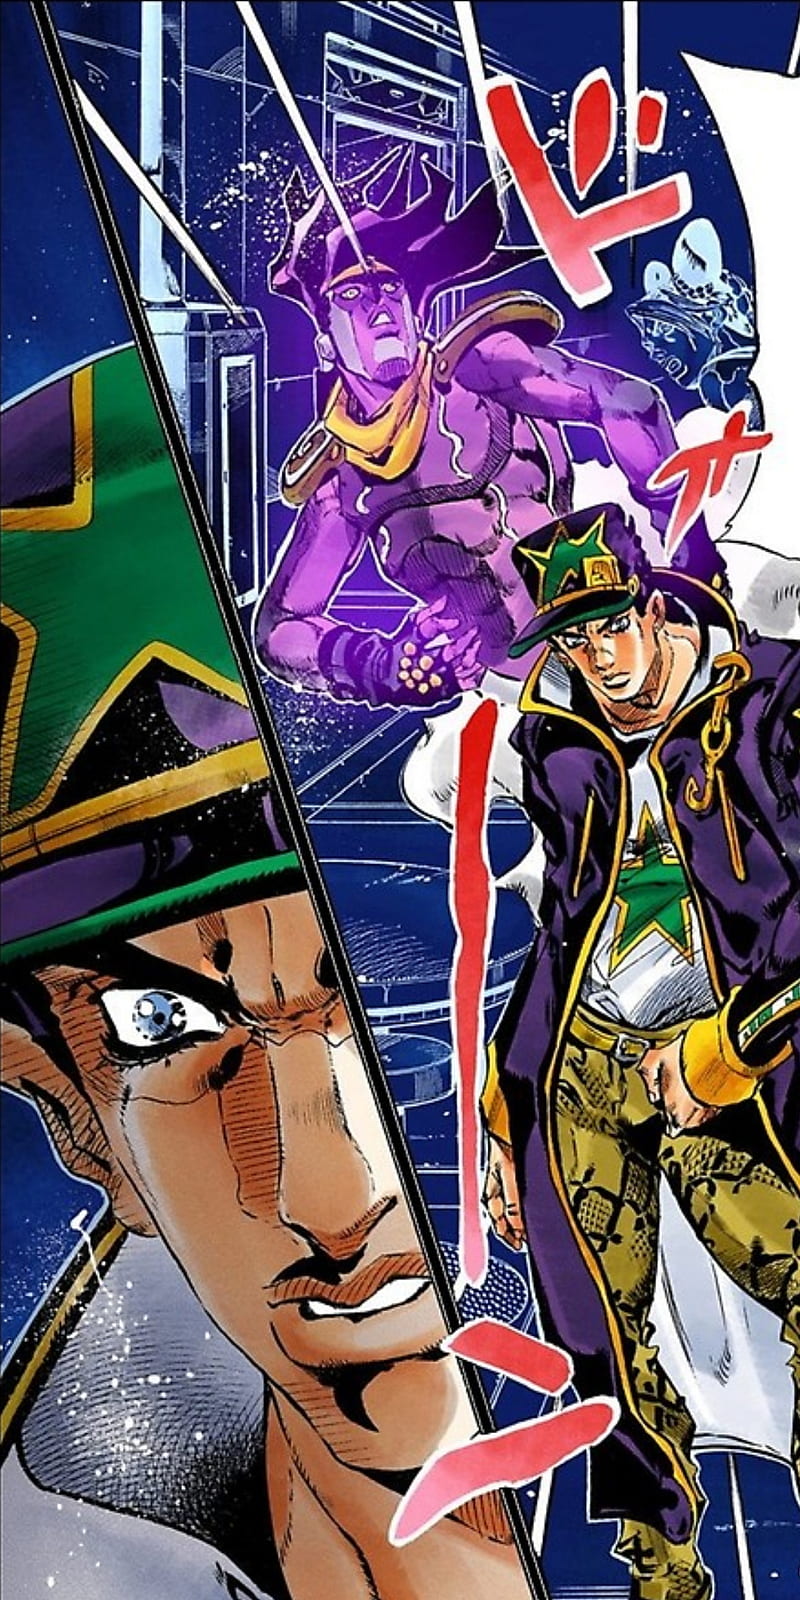 Frederick Bulsara on X: Today March 21, 2012, Jotaro Kujo died. - - - - -  i am still not Prepared For This and imagine next year the final episode  airs on